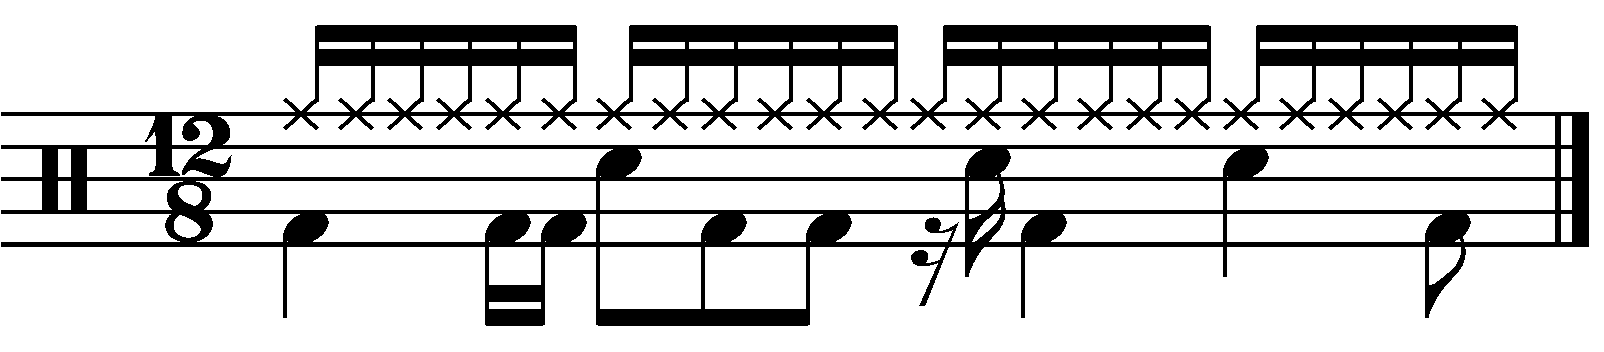 A 12/8 groove with a 16th note right hand